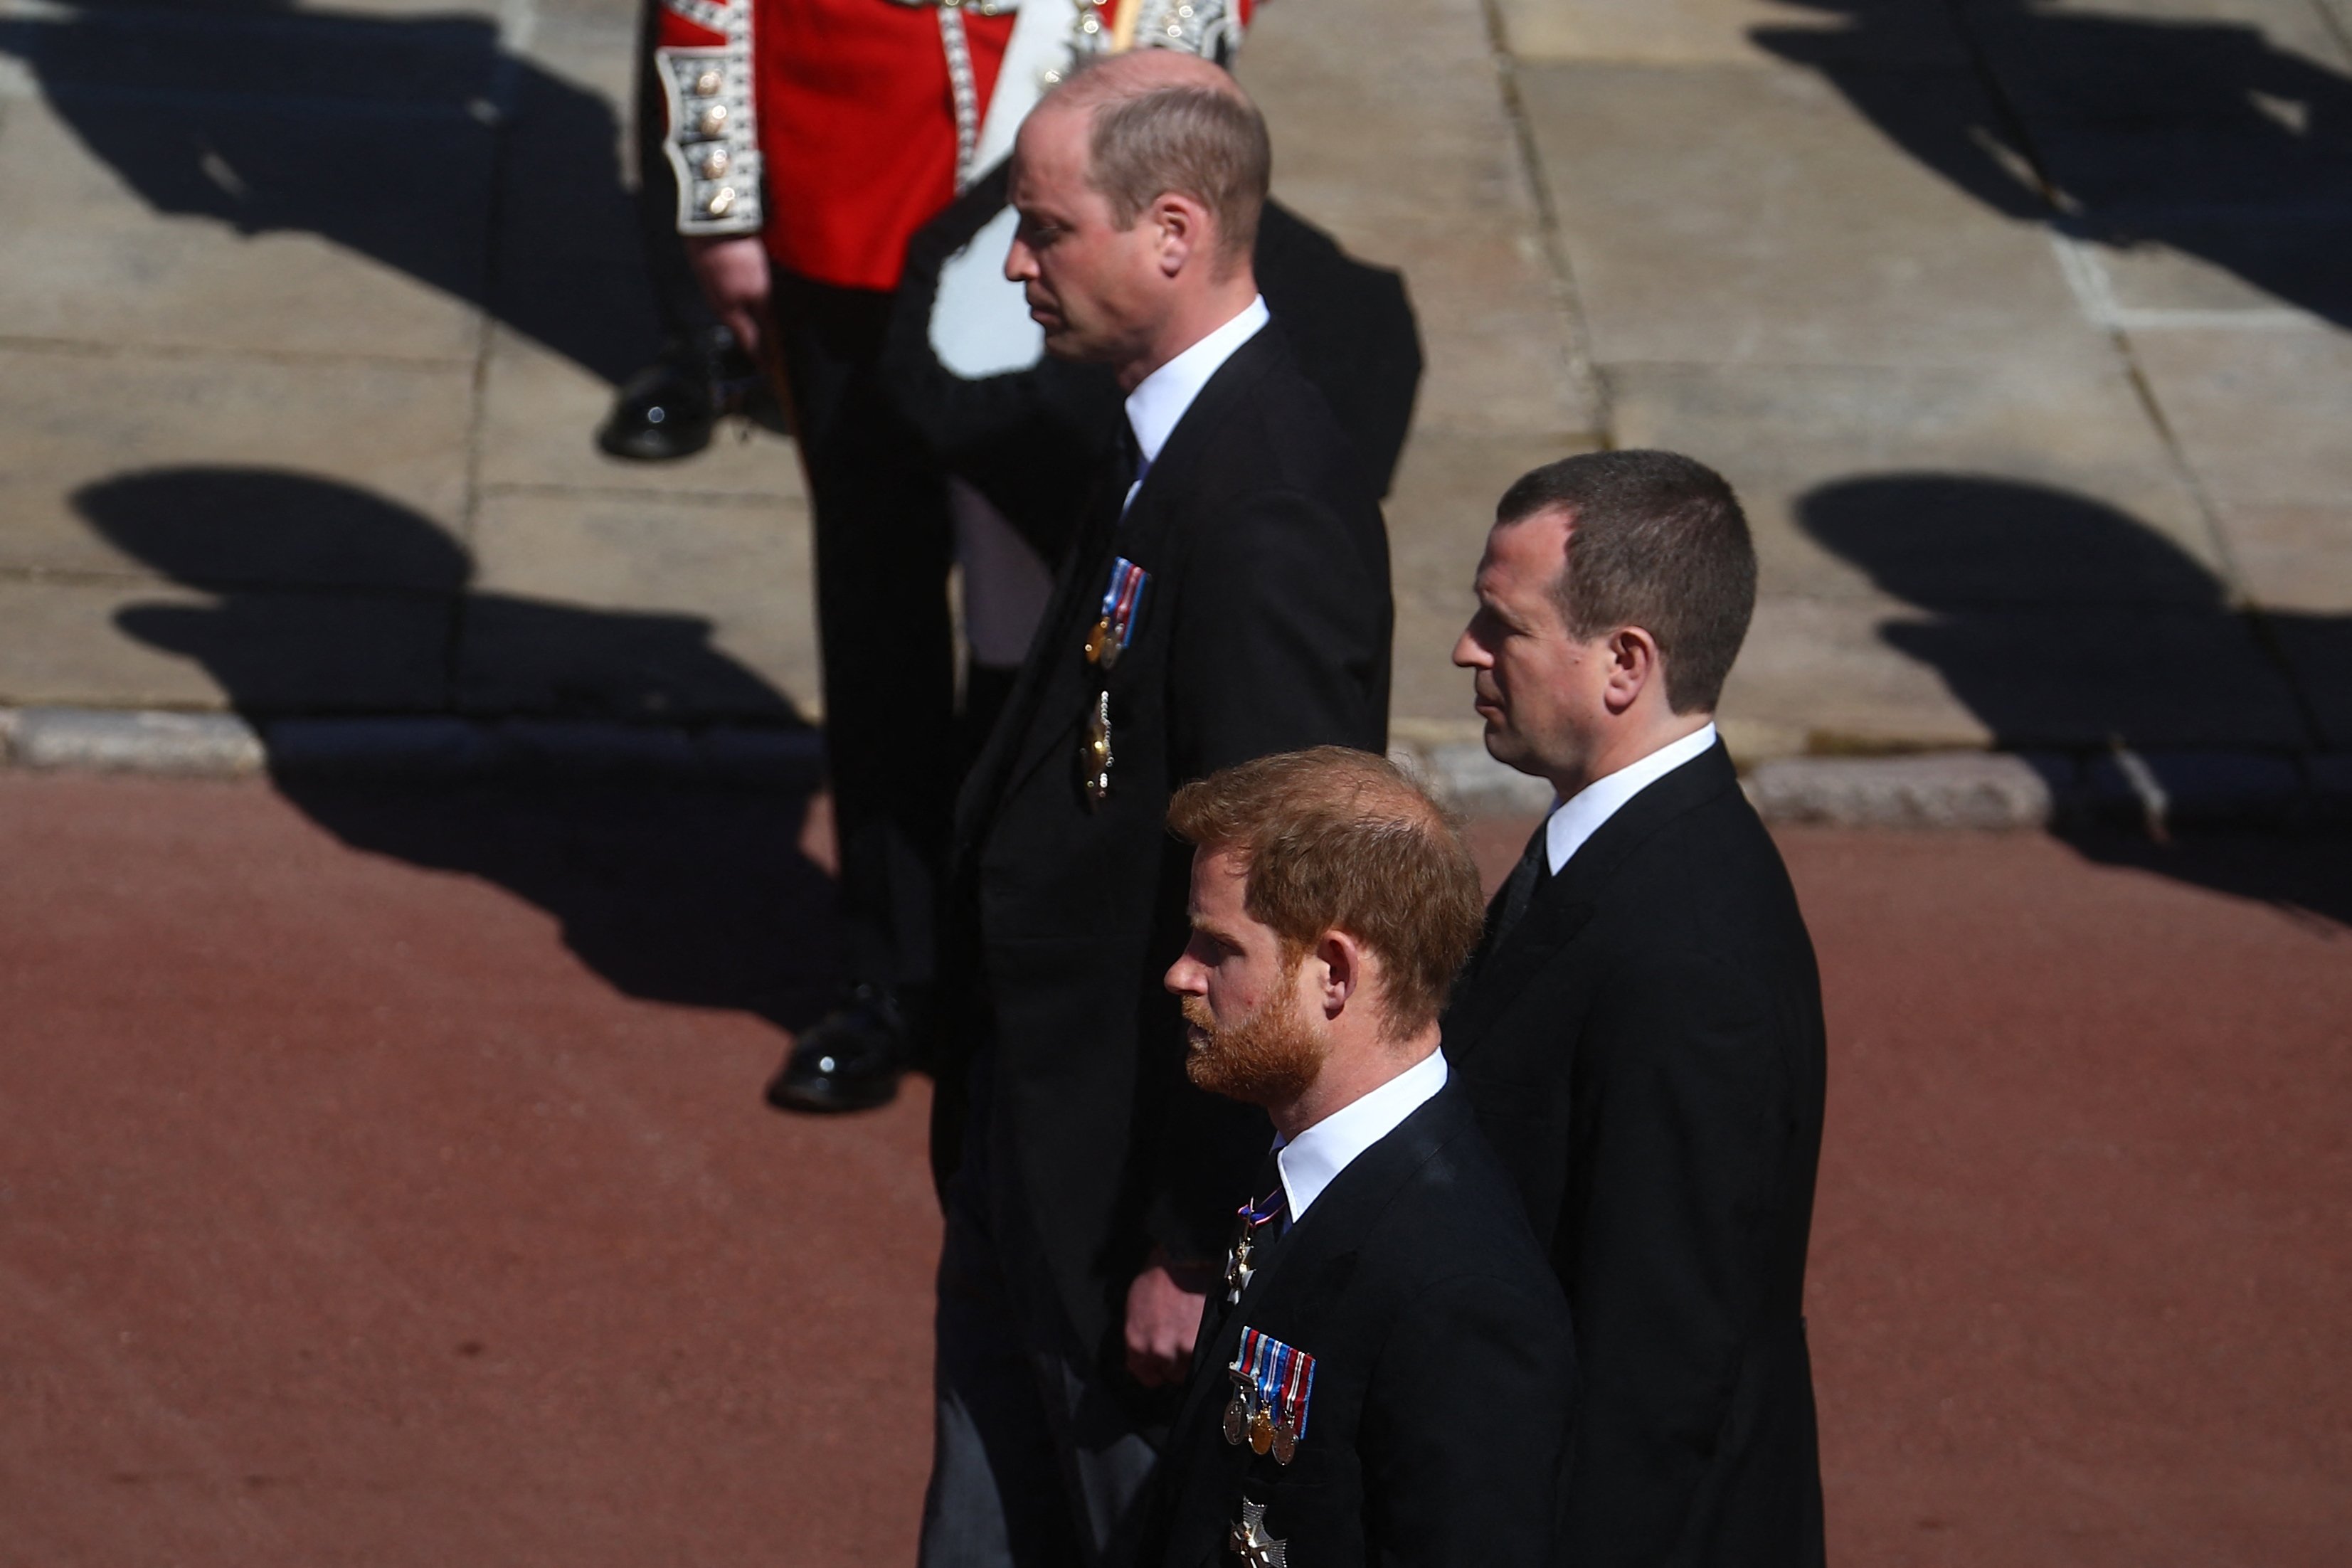 Prince William, Prince Harry and their cousin Peter Phillips follow the coffin of their grandfather, Prince Philip, the Duke of Edinburgh on April, 17, 2021